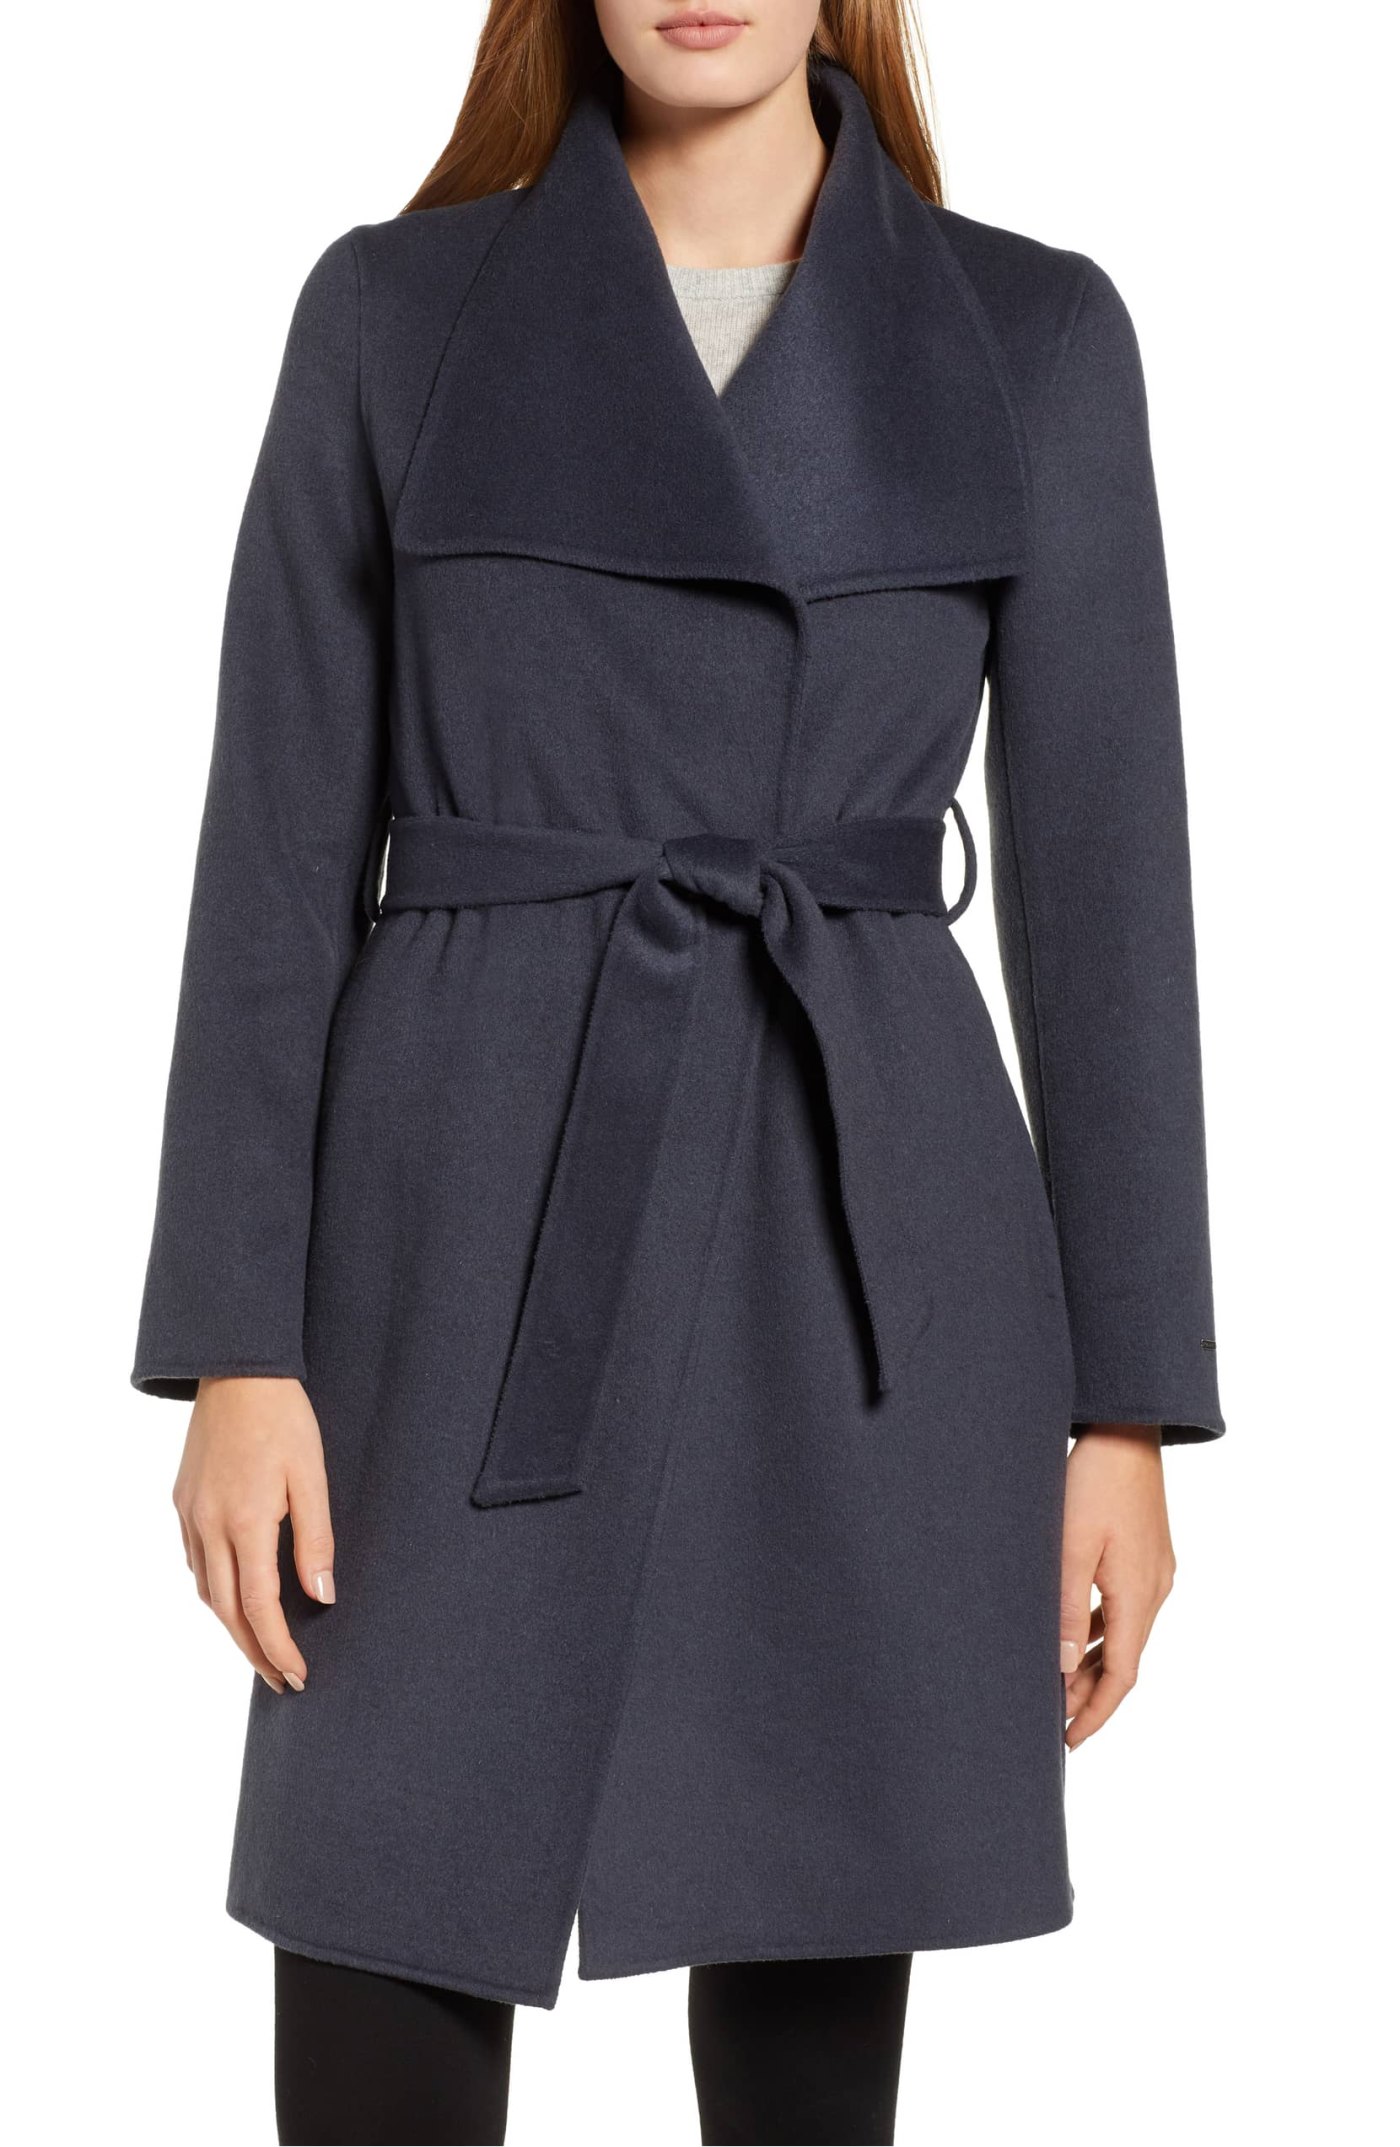 This Wrap Coat Is Comfy, Chic & Fresh on the Nordstrom Sale Rack